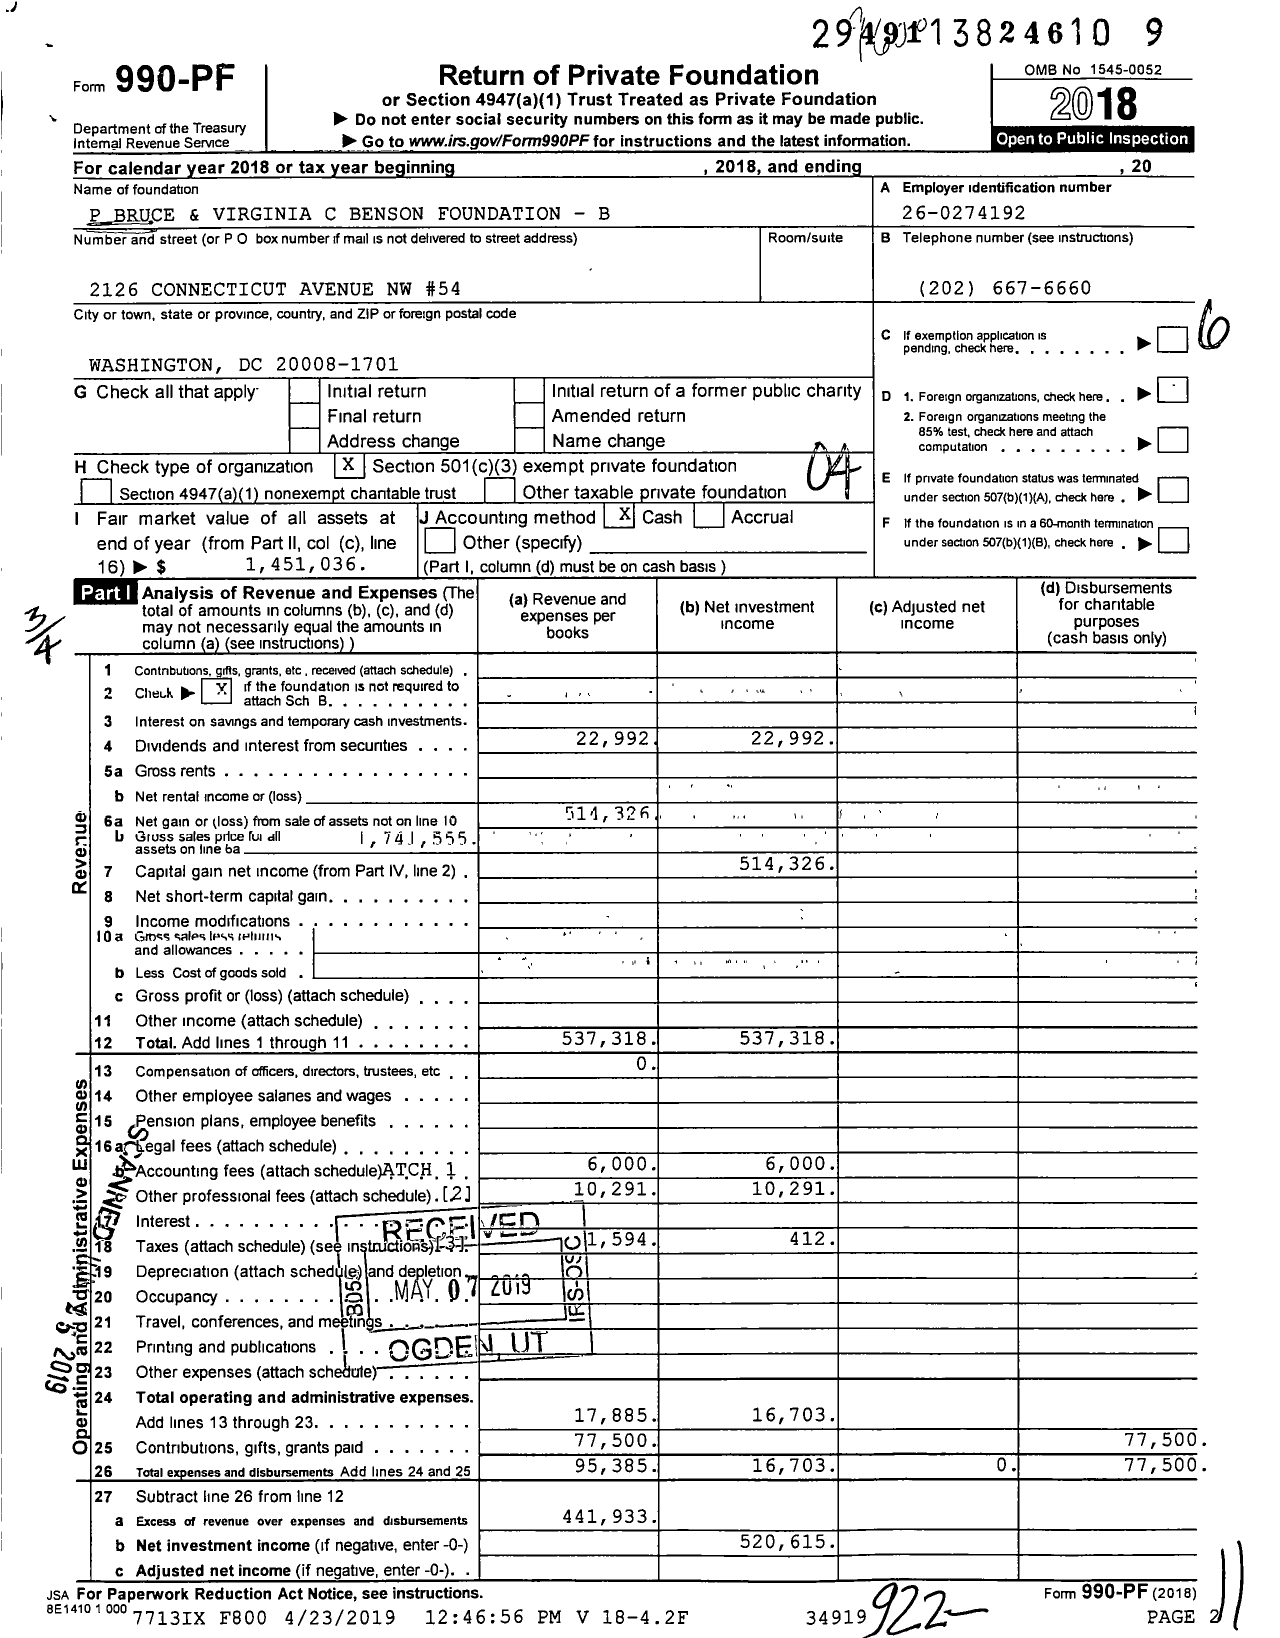 Image of first page of 2018 Form 990PF for P Bruce and Virginia C Benson Foundation - B